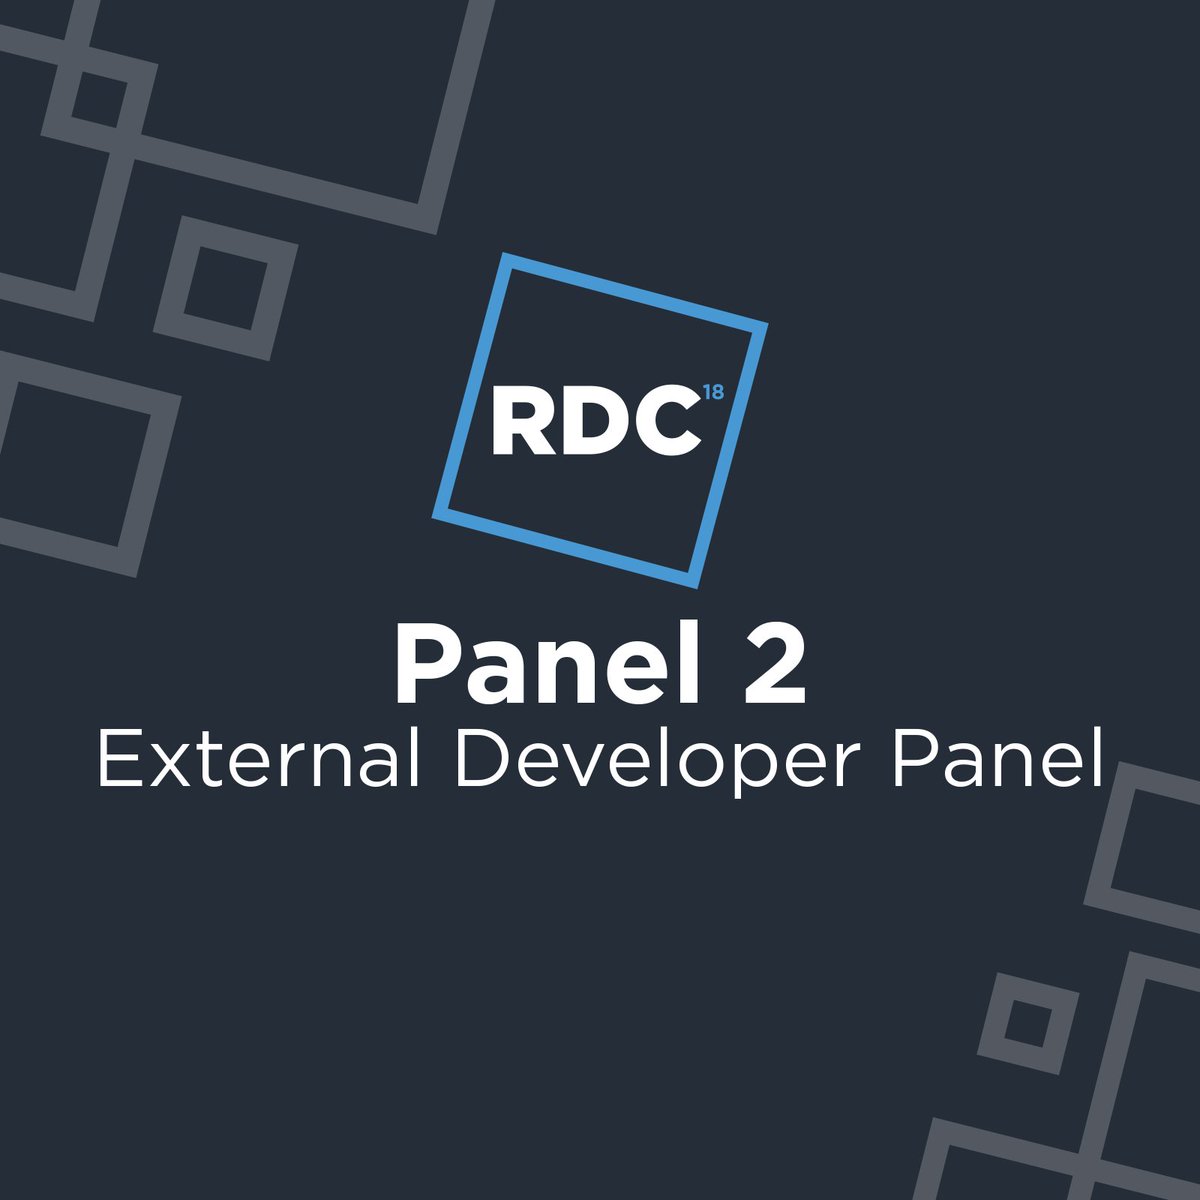 Roblox Developer Relations On Twitter Time To Hear From Our Devs Tune In Now To Hear From Henrythedev Kevinisnotseven Silenxed On Their Experience On Roblox And Building Their Games Watch On Https T Co Zch9ec684x - roblox twitter henrythedev